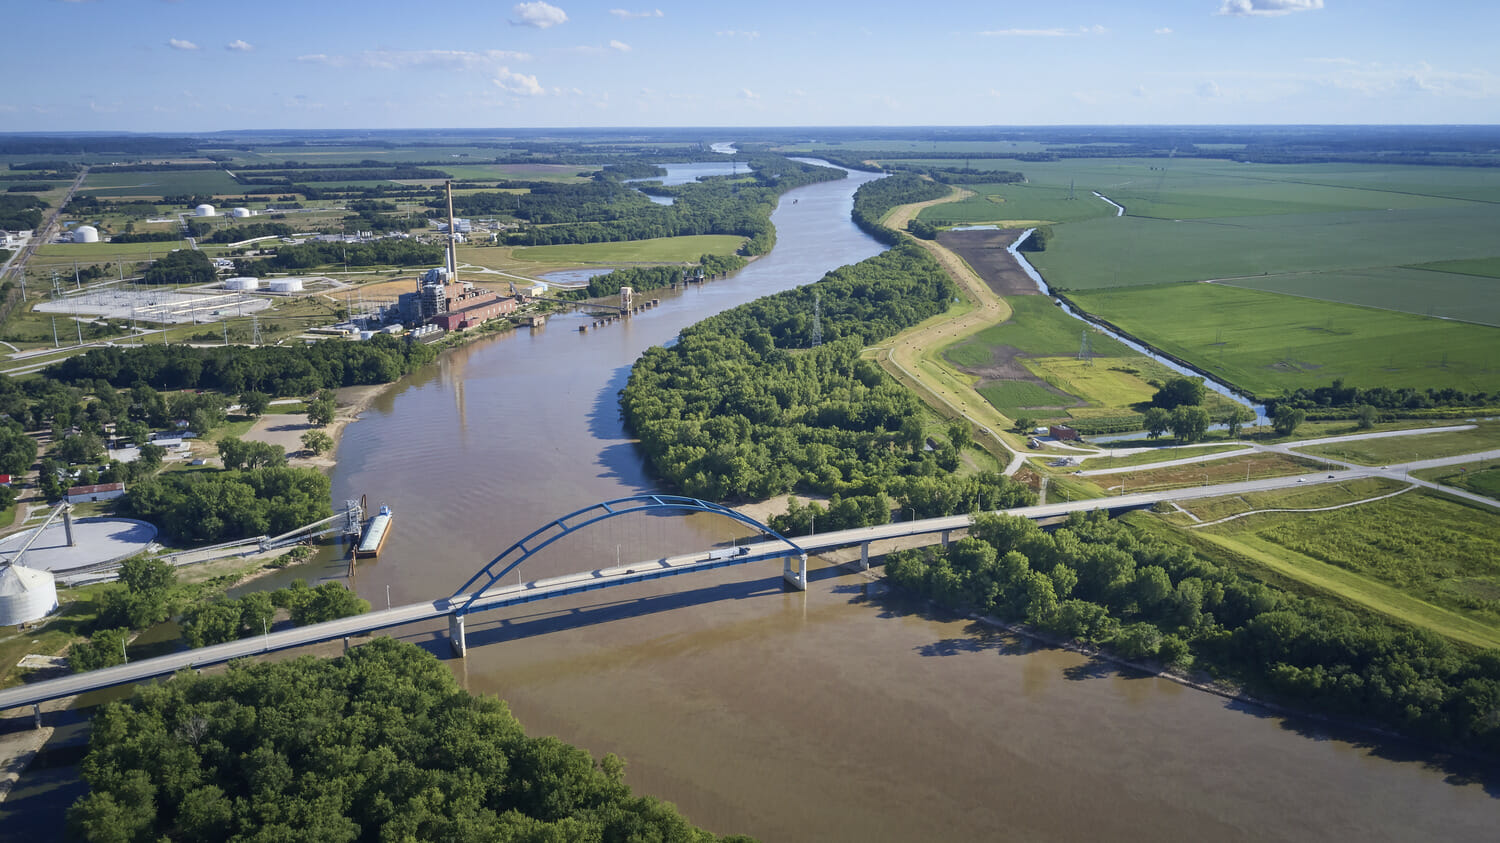 An aerial view of a river and a bridge.